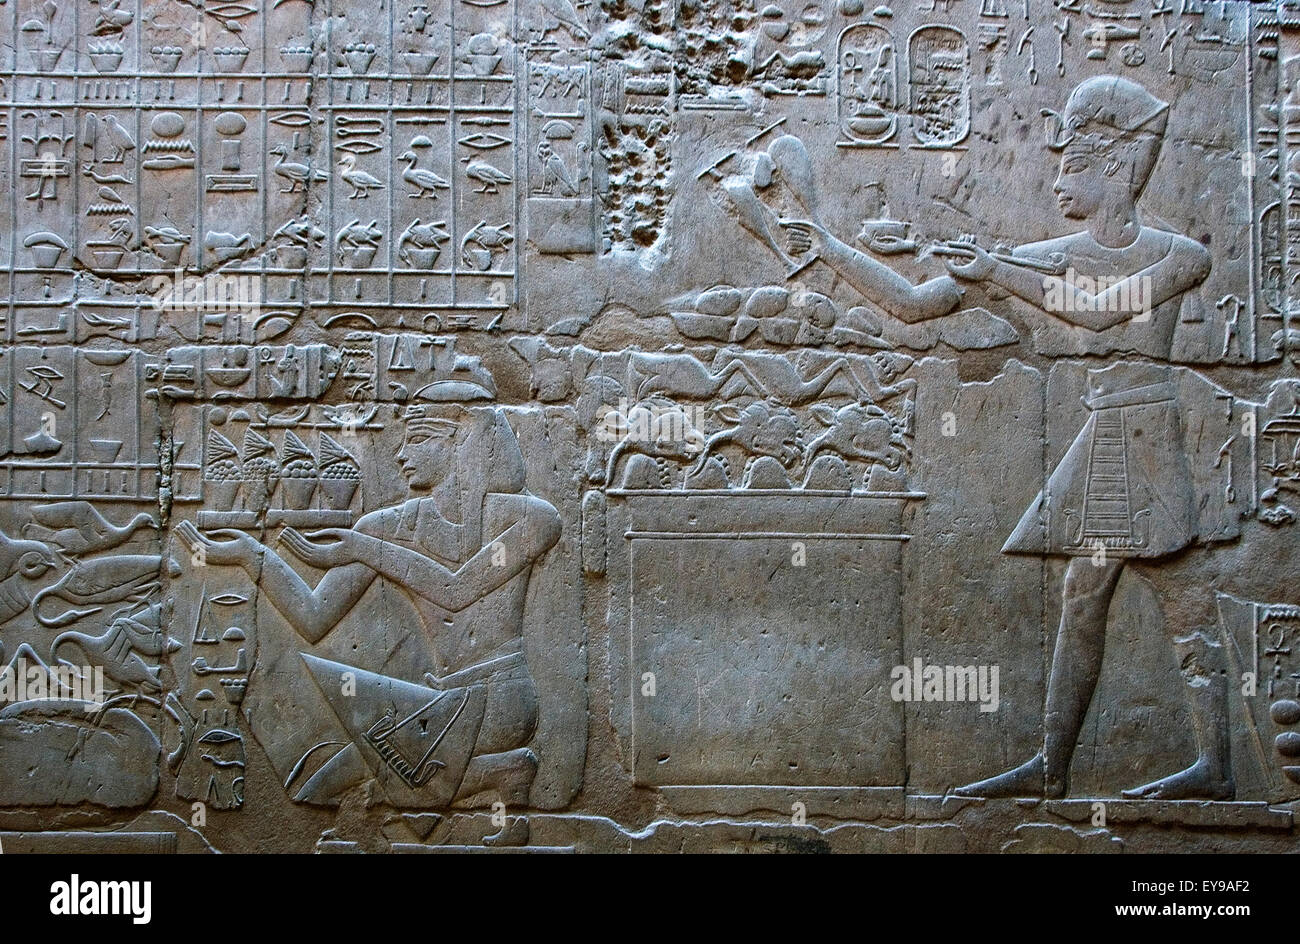 Luxor, Egypt. Temple of Luxor (Ipet resyt): the pharaoh Amenhotep III offering to gods Stock Photo